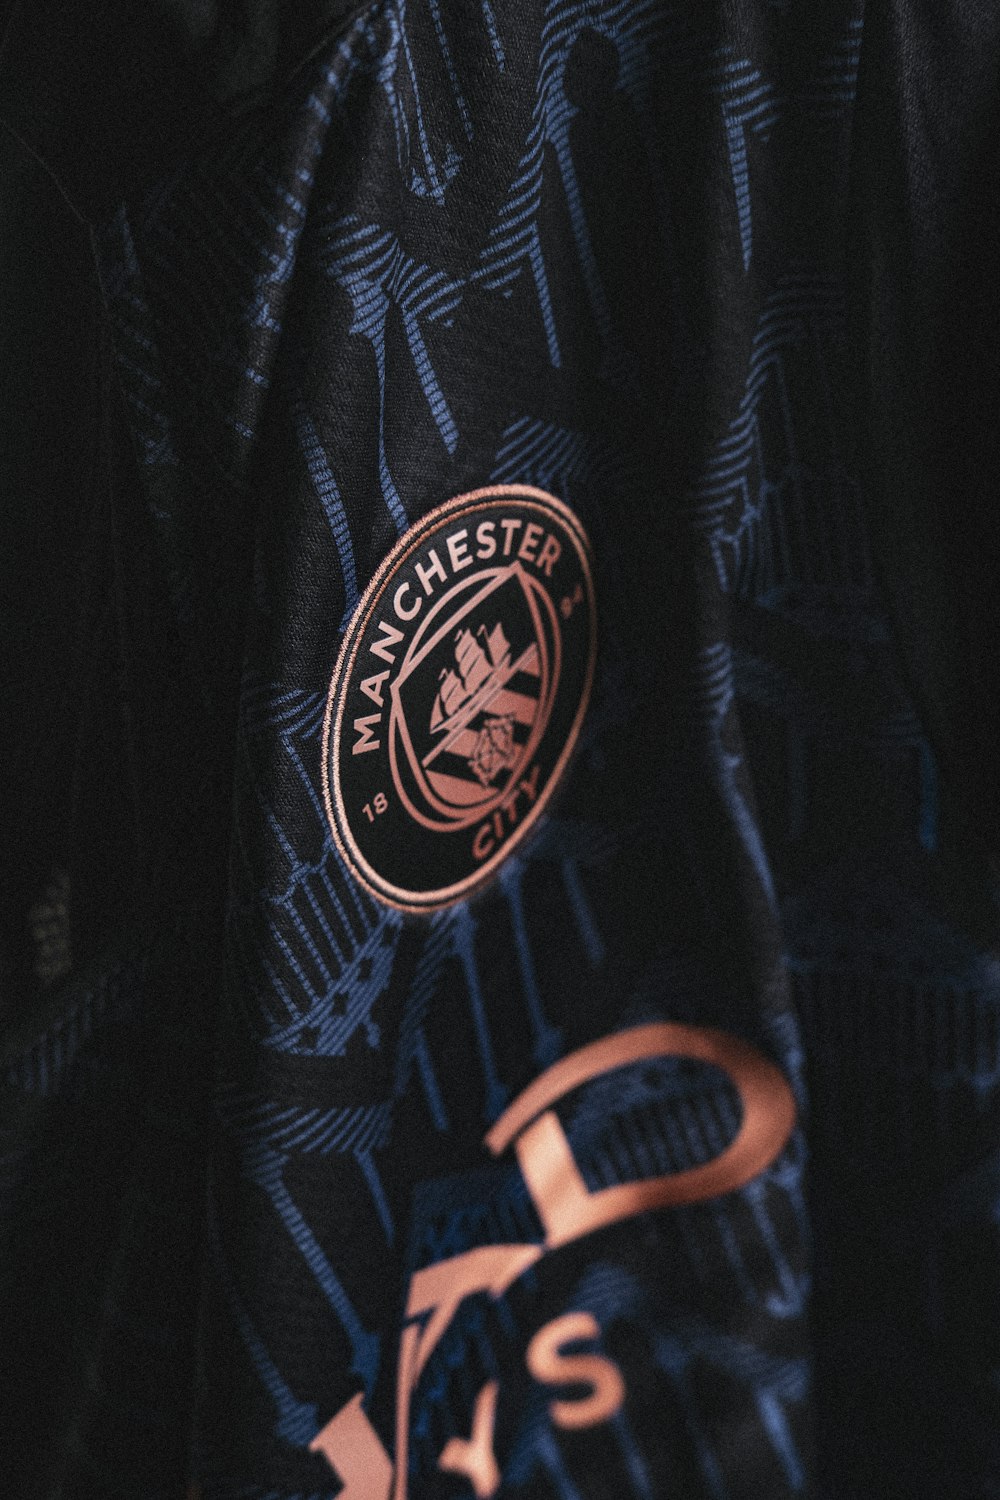 a close up of a man's jacket with a badge on it